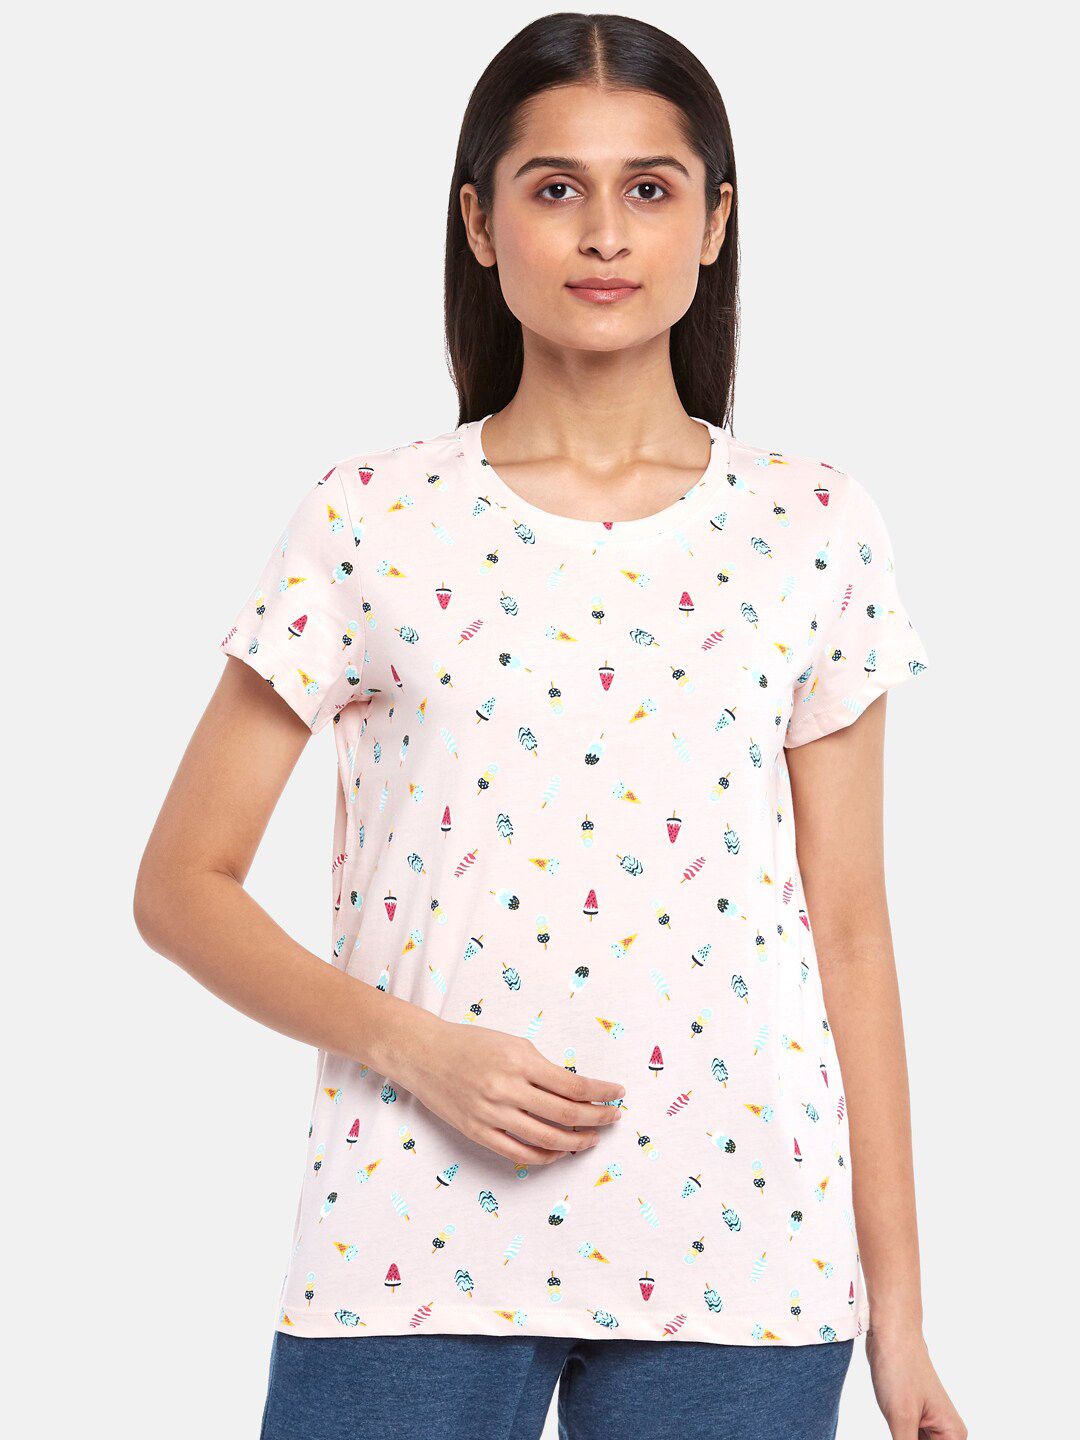 Dreamz by Pantaloons Pink Printed Cotton Lounge T-shirt Price in India